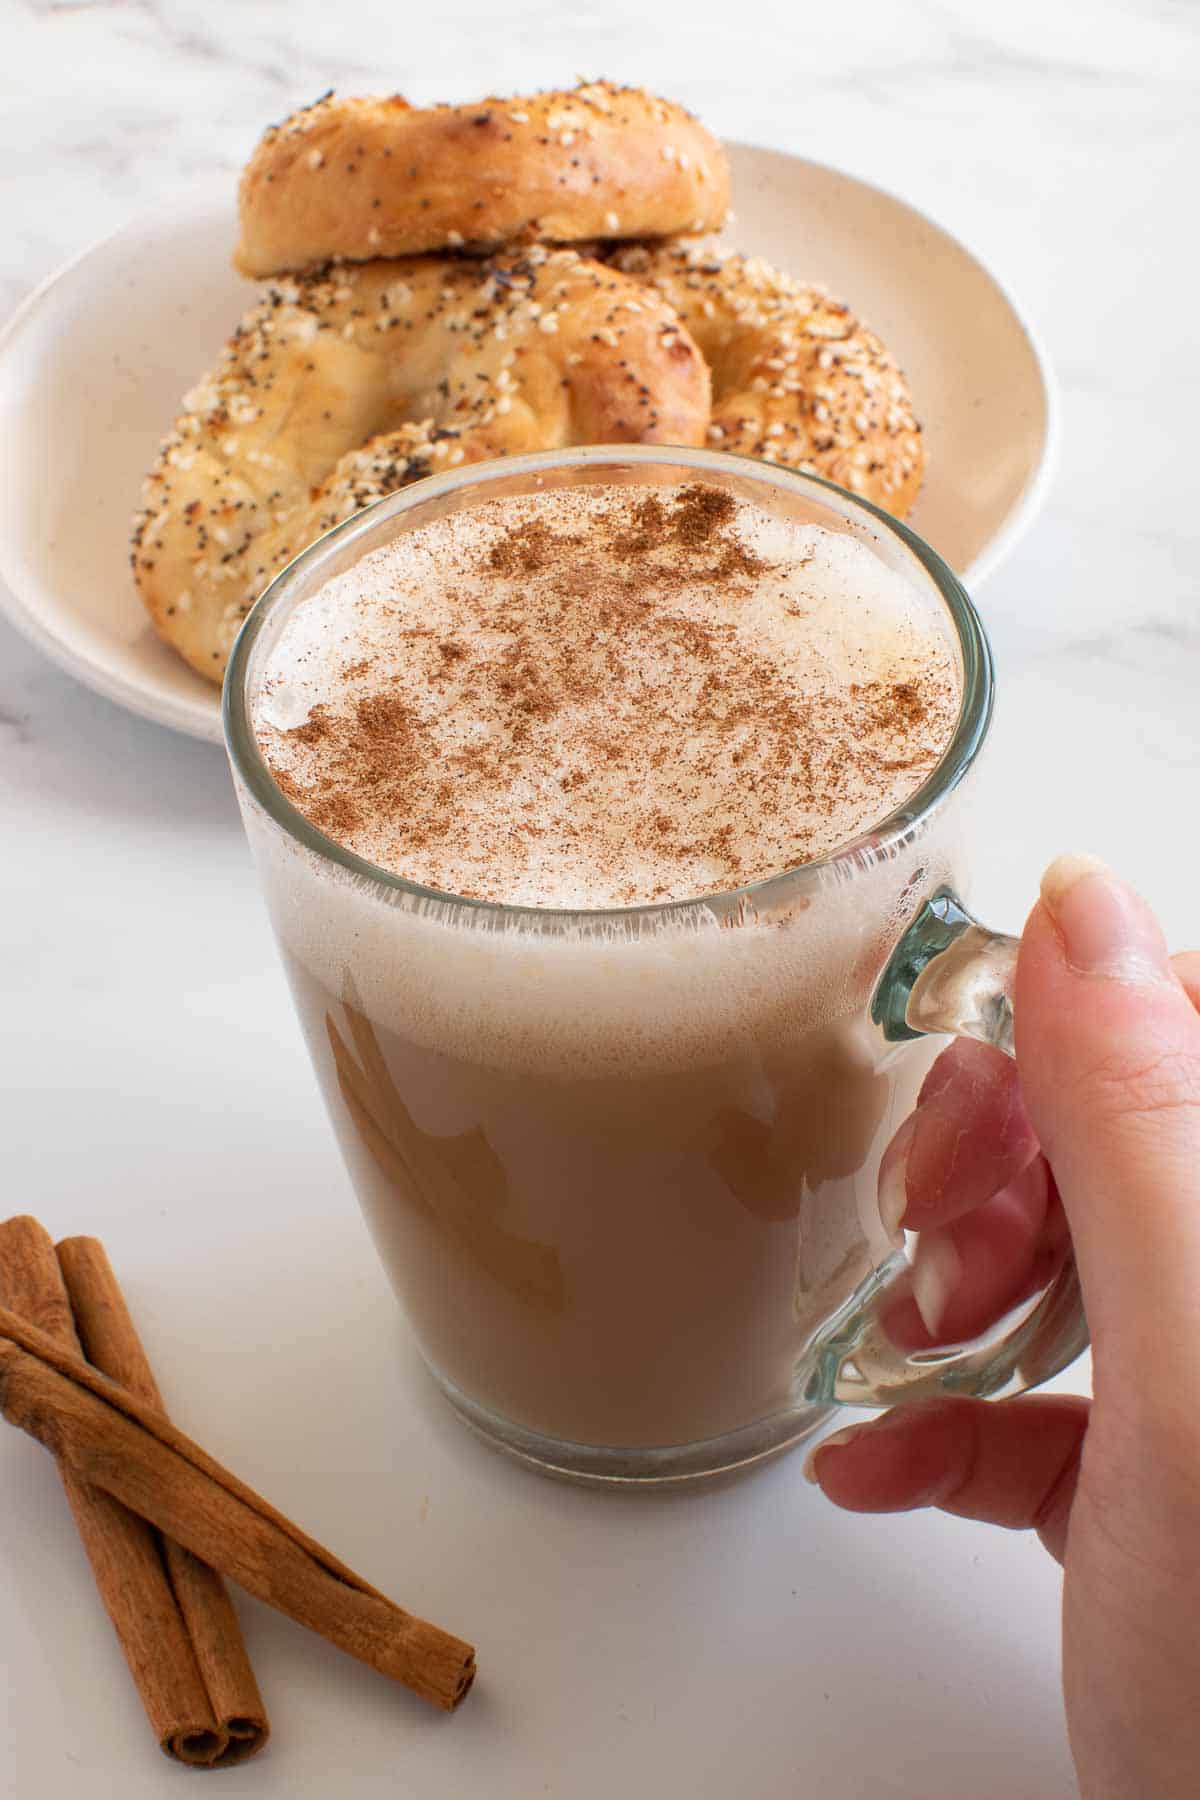 A hand picking up a cup of eggnog latte, with bagels in the background.